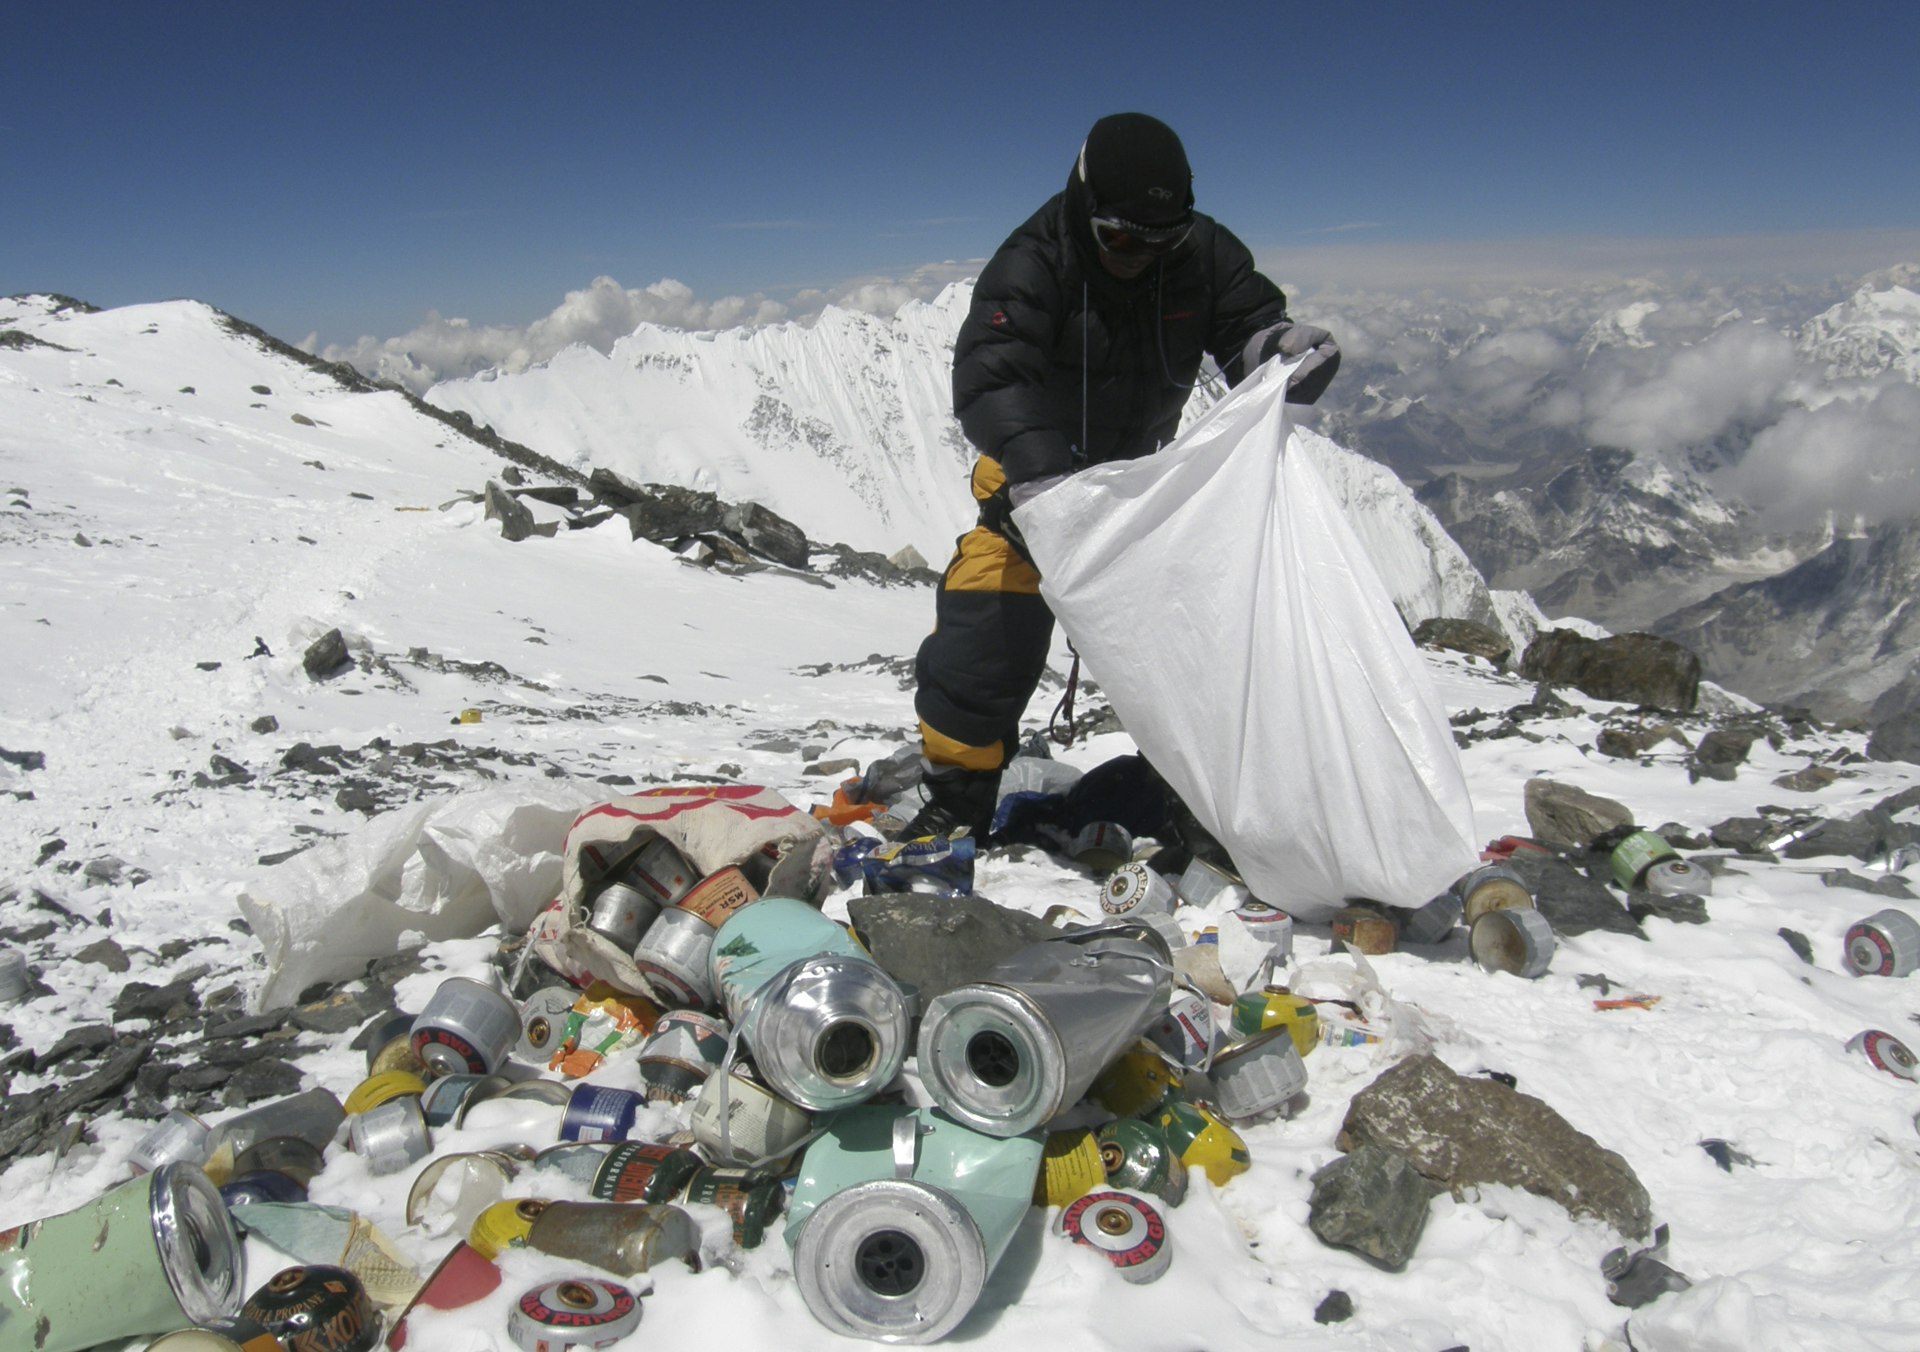 A Nepalese sherpa collecting garbage left by climbers